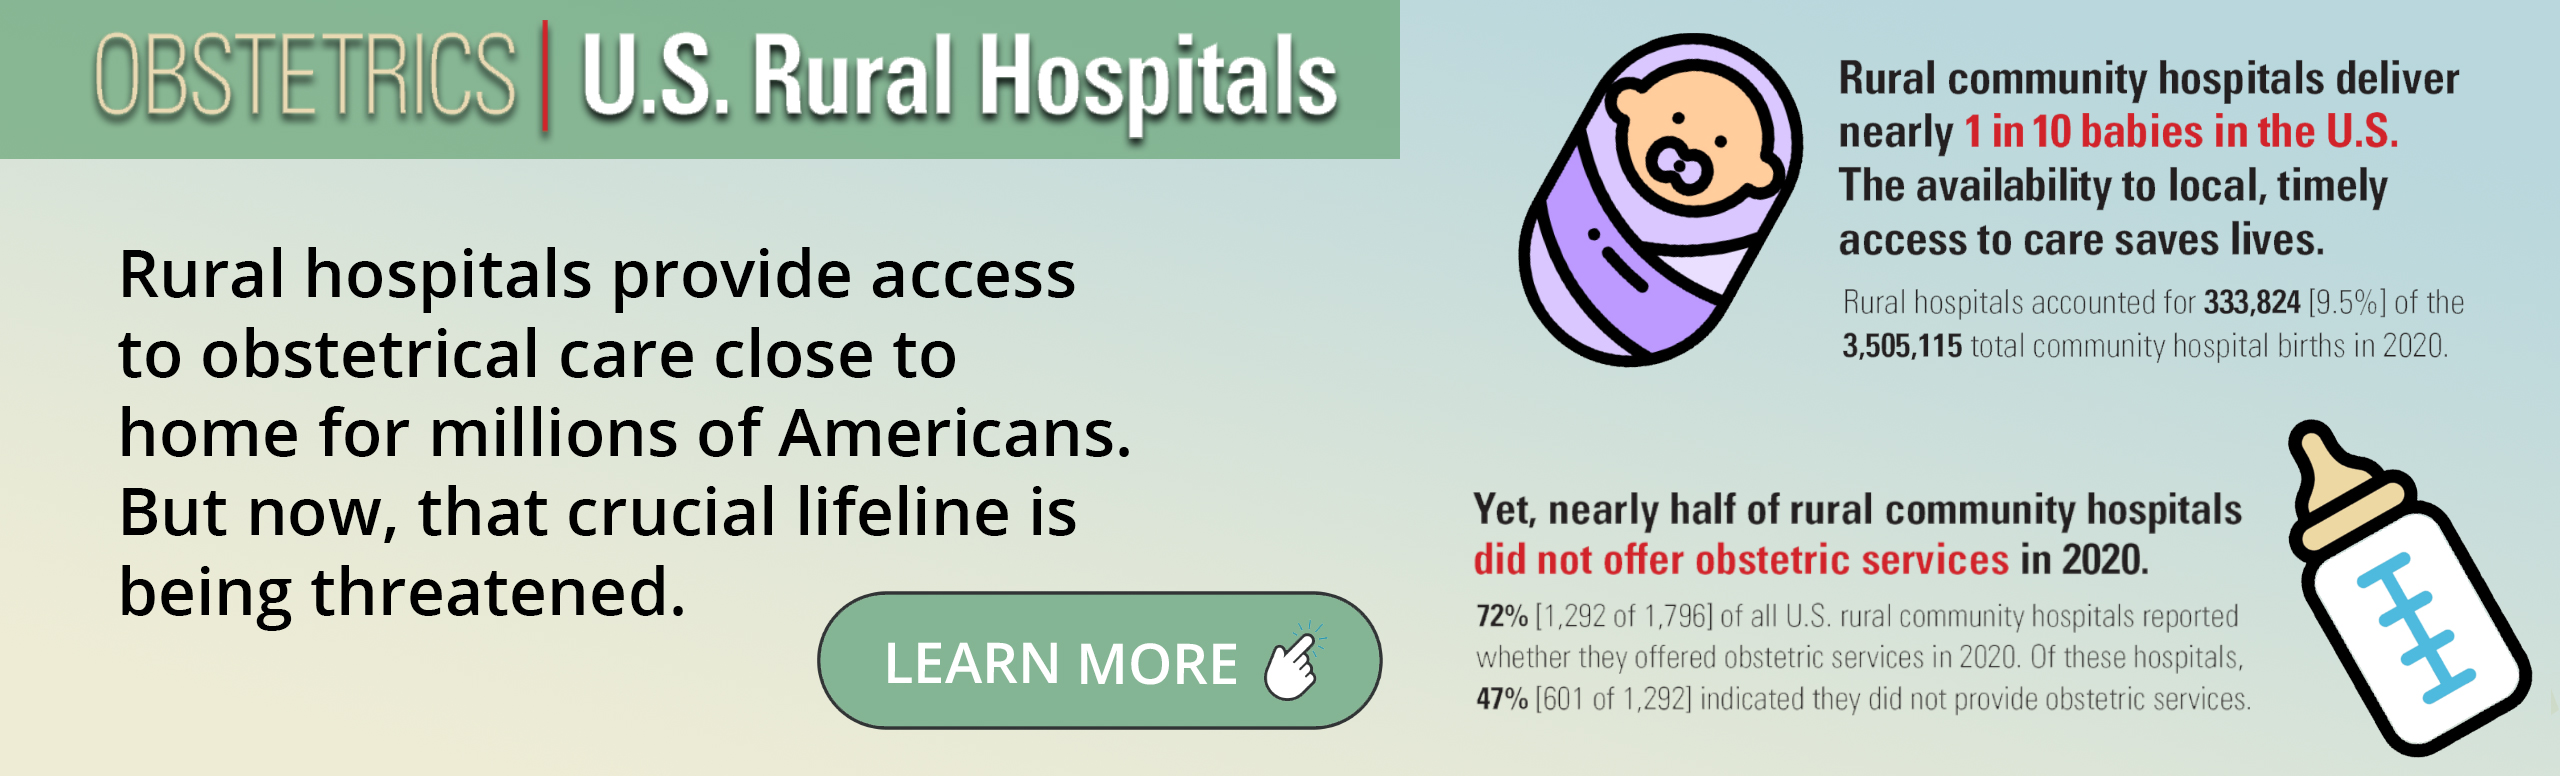 OBSTETRICS | U.S. Rural Hospitals 

Rural hospitals provide access to obstetrical care close to home for millions of Americans. But now, that crucial lifeline is being threatened.

Rural community hospitals deliver nearly 1 in 10 babies in the U.S. The availability to local, timely access to care saves lives.

Rural hospitals  accounted  for 333,824 (9.5%) of the 3,505,115 total community hospital births in 2020.

Yet, nearly half of rural community hospitals reported whether they offered obstetric services in 2020. Of these hospitals, 47% (601 of 1,292) indicated they did not provide obstetric services.

( learn more )